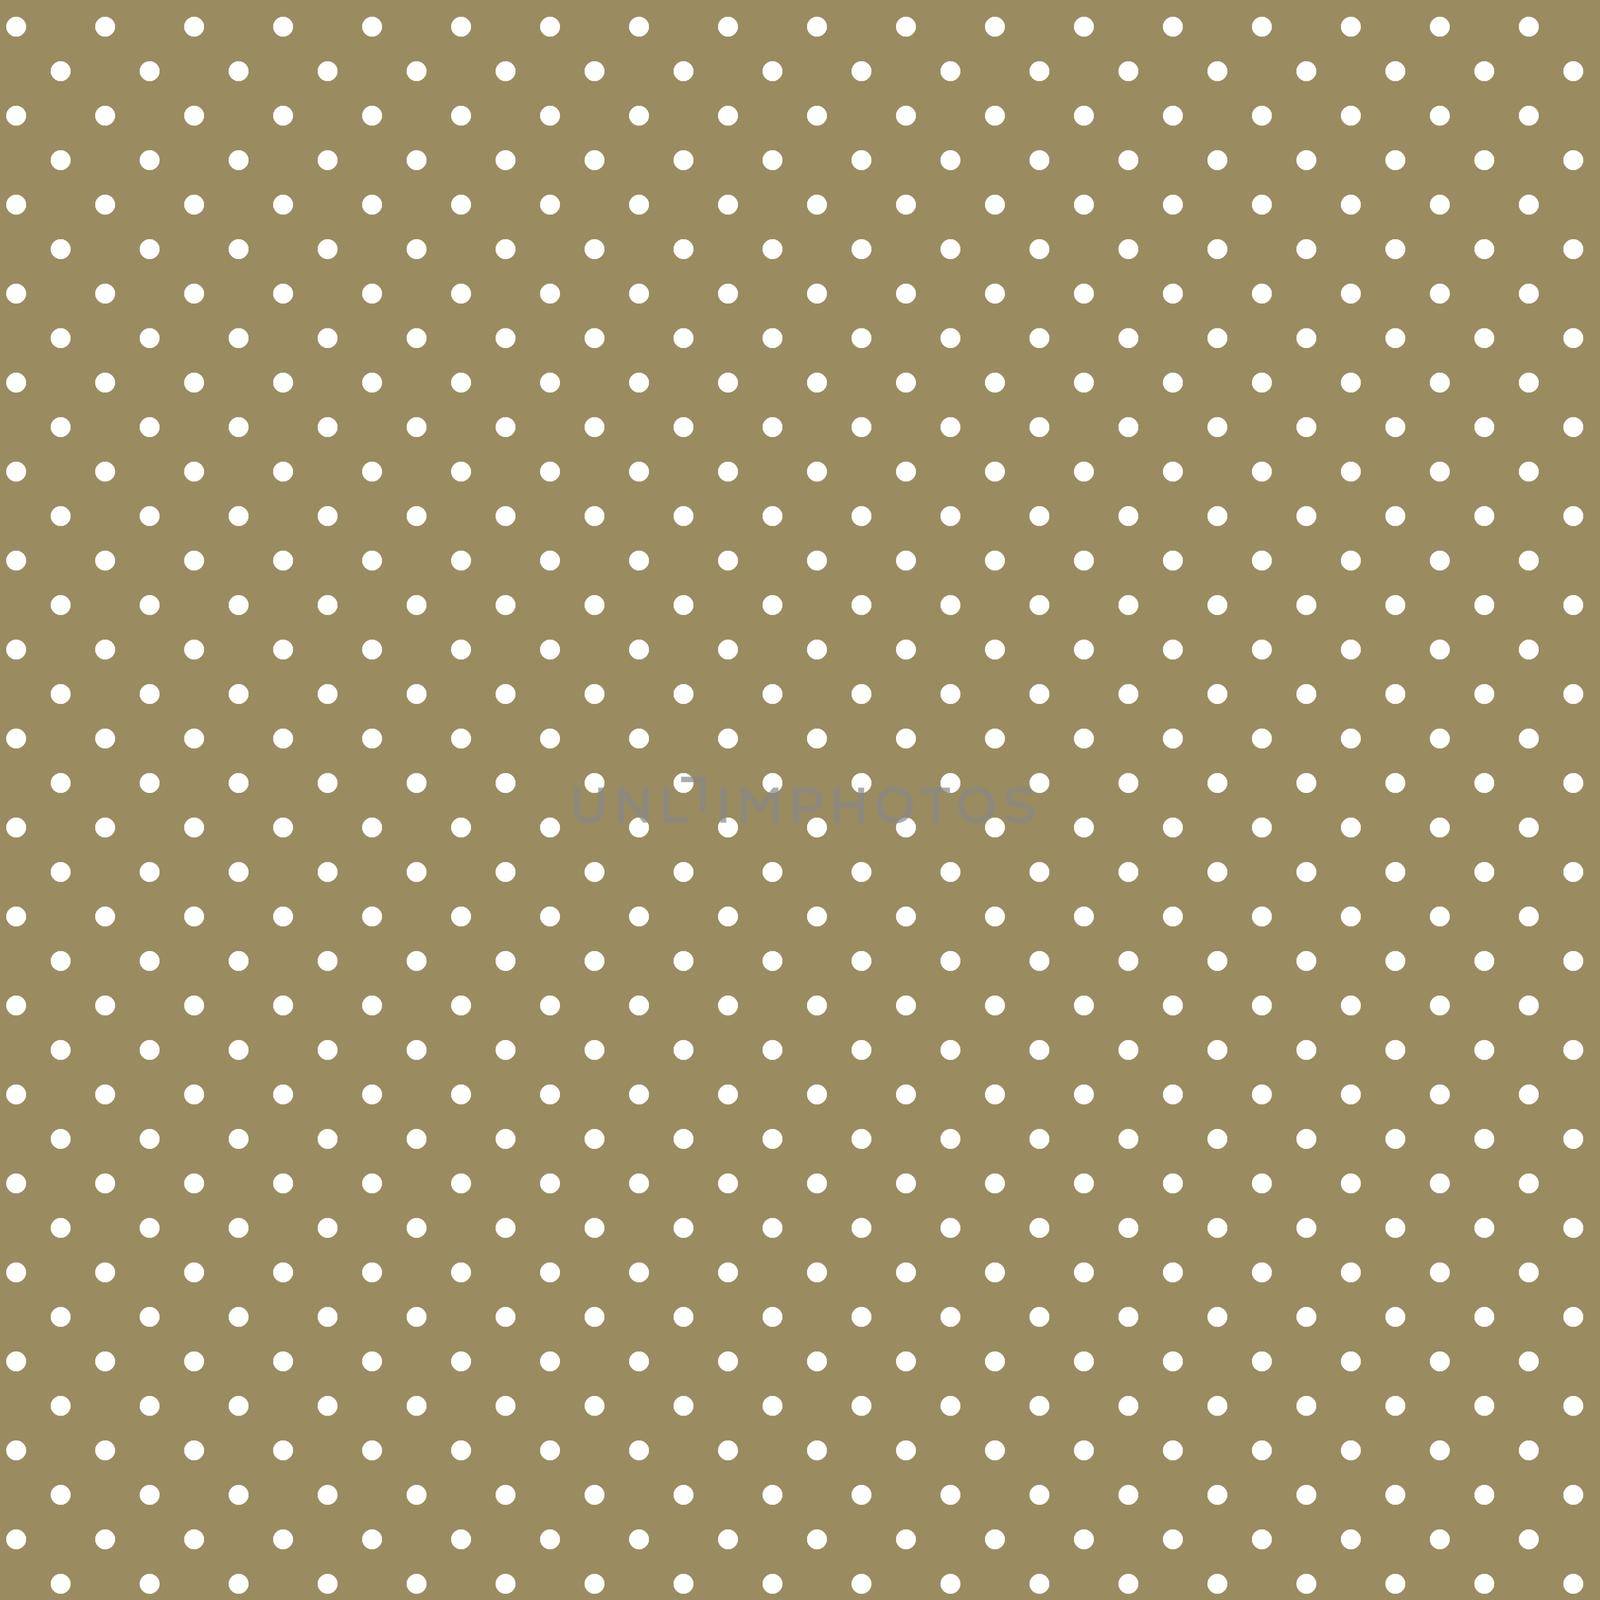 Image of small white circles on a brown background